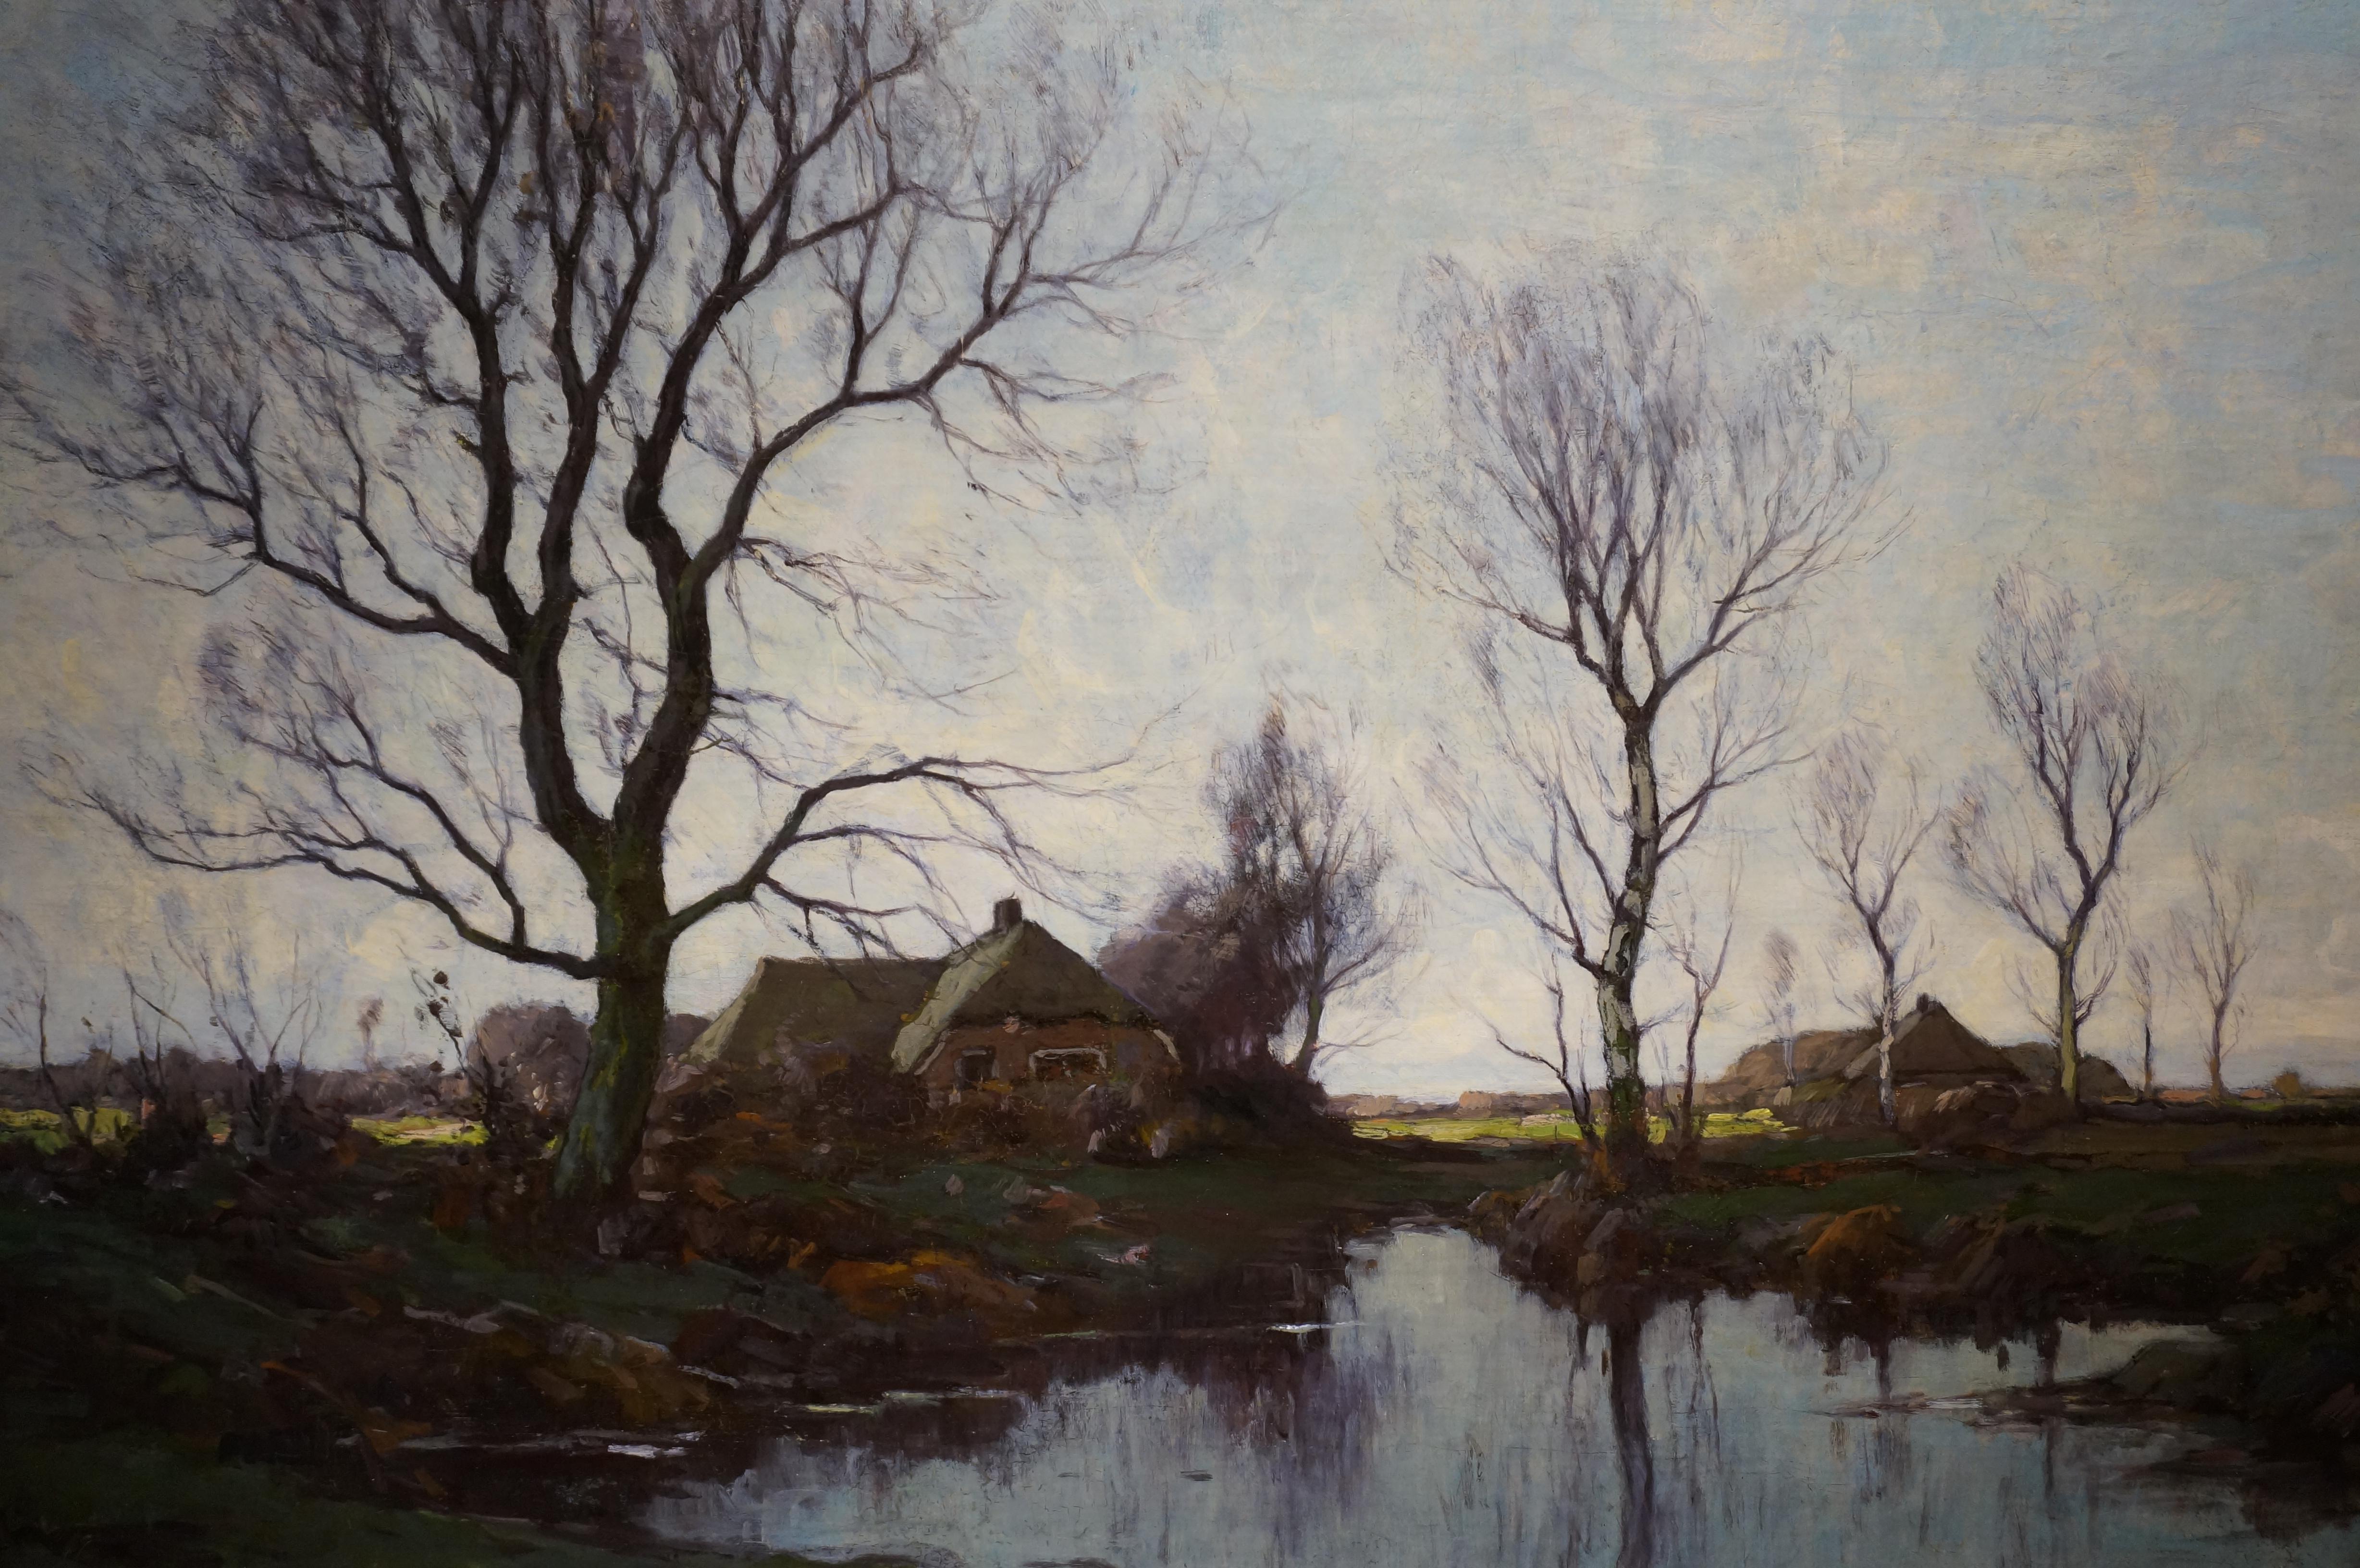 Paul Bodifeé (Deventer 1866 - 1939 Deventer)
Dutch Landscape Overijssel with farmhouses
Signed lower left Paul Bodifée
Oil on canvas
In good condition, professionally restored and relined
Dimensions (excl. frame): 60 x 90 cm.
In modern